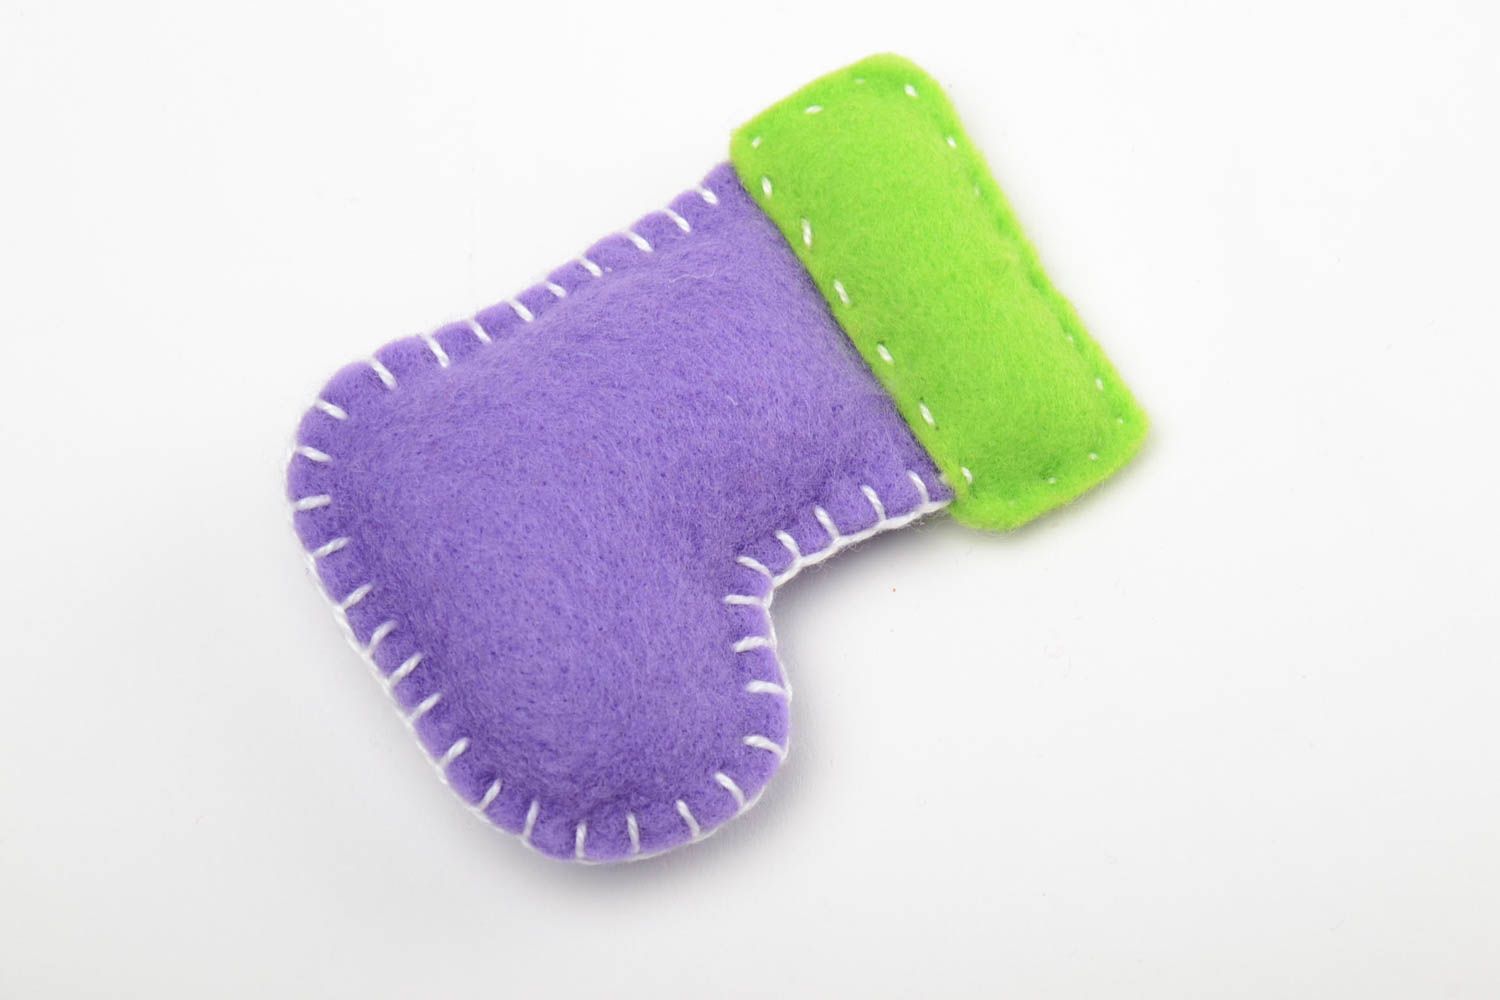 Handmade small colorful felt soft toy boot violet and green for kids and decor photo 4